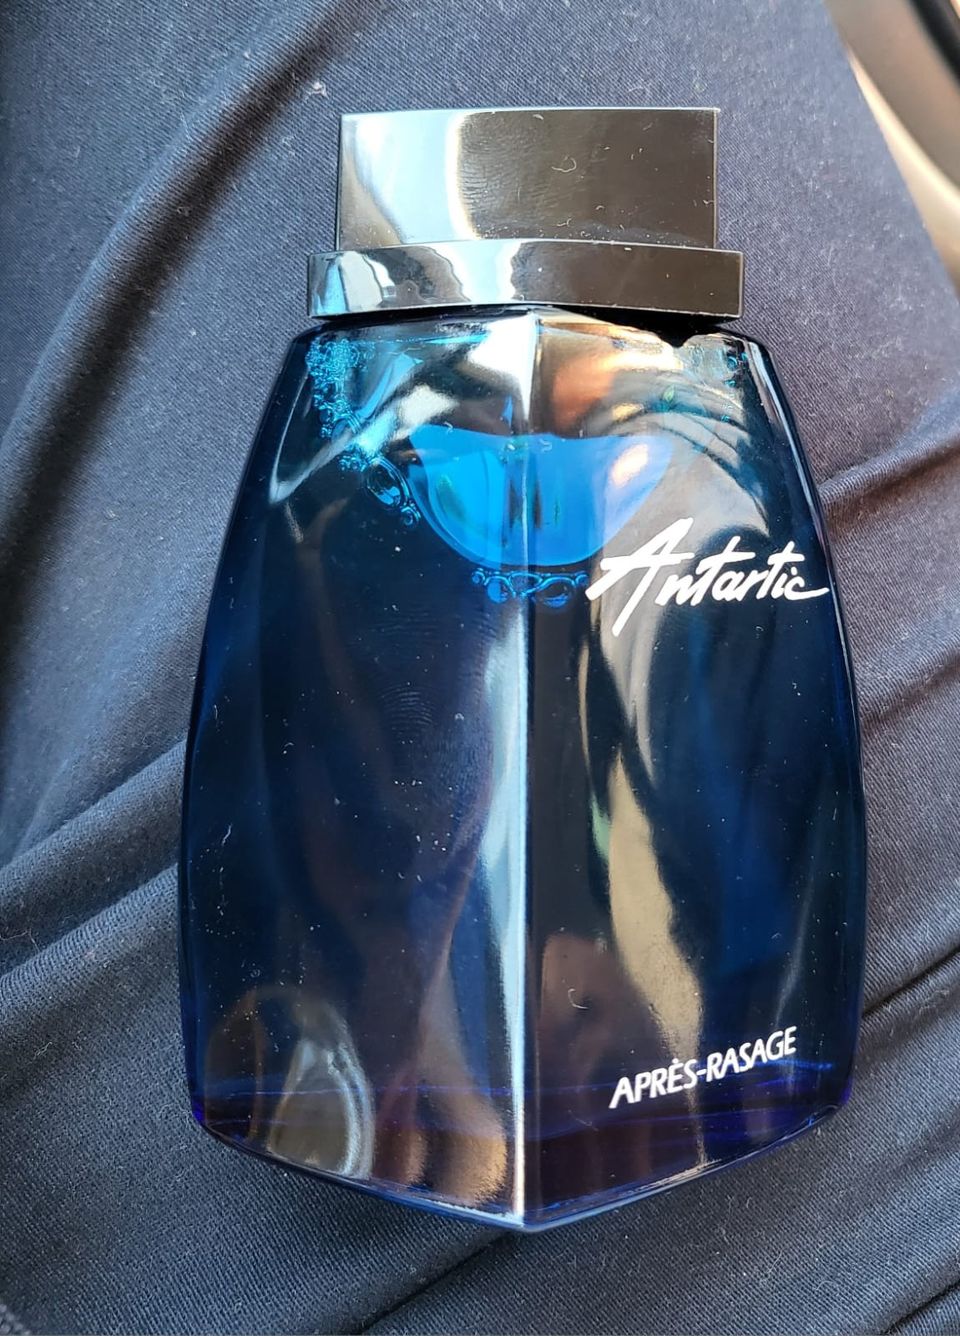 Yves Rocher Antartic miesten after shave